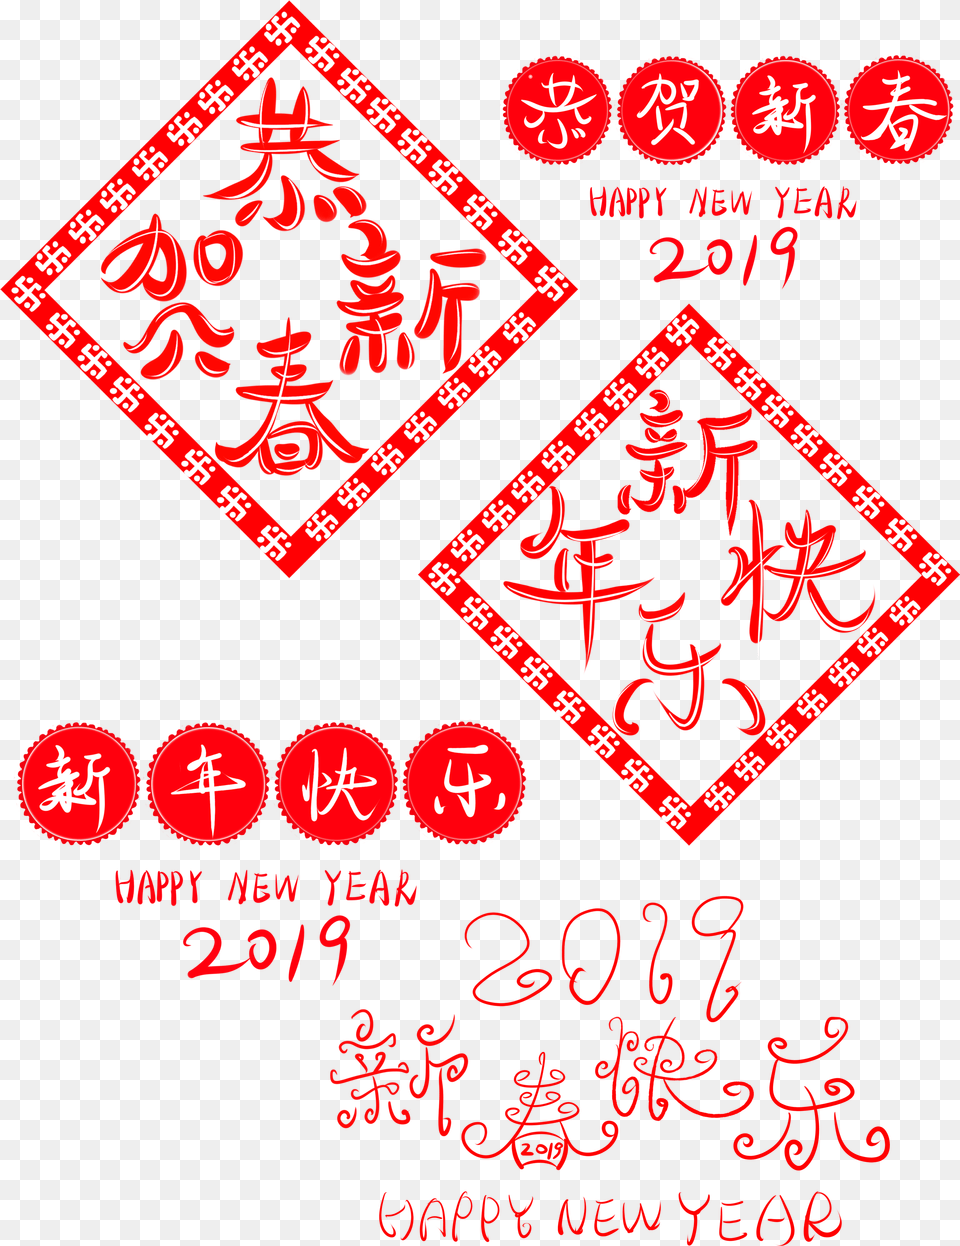 Happy New Year Congratulations 2019 Word Art And, Text Png Image